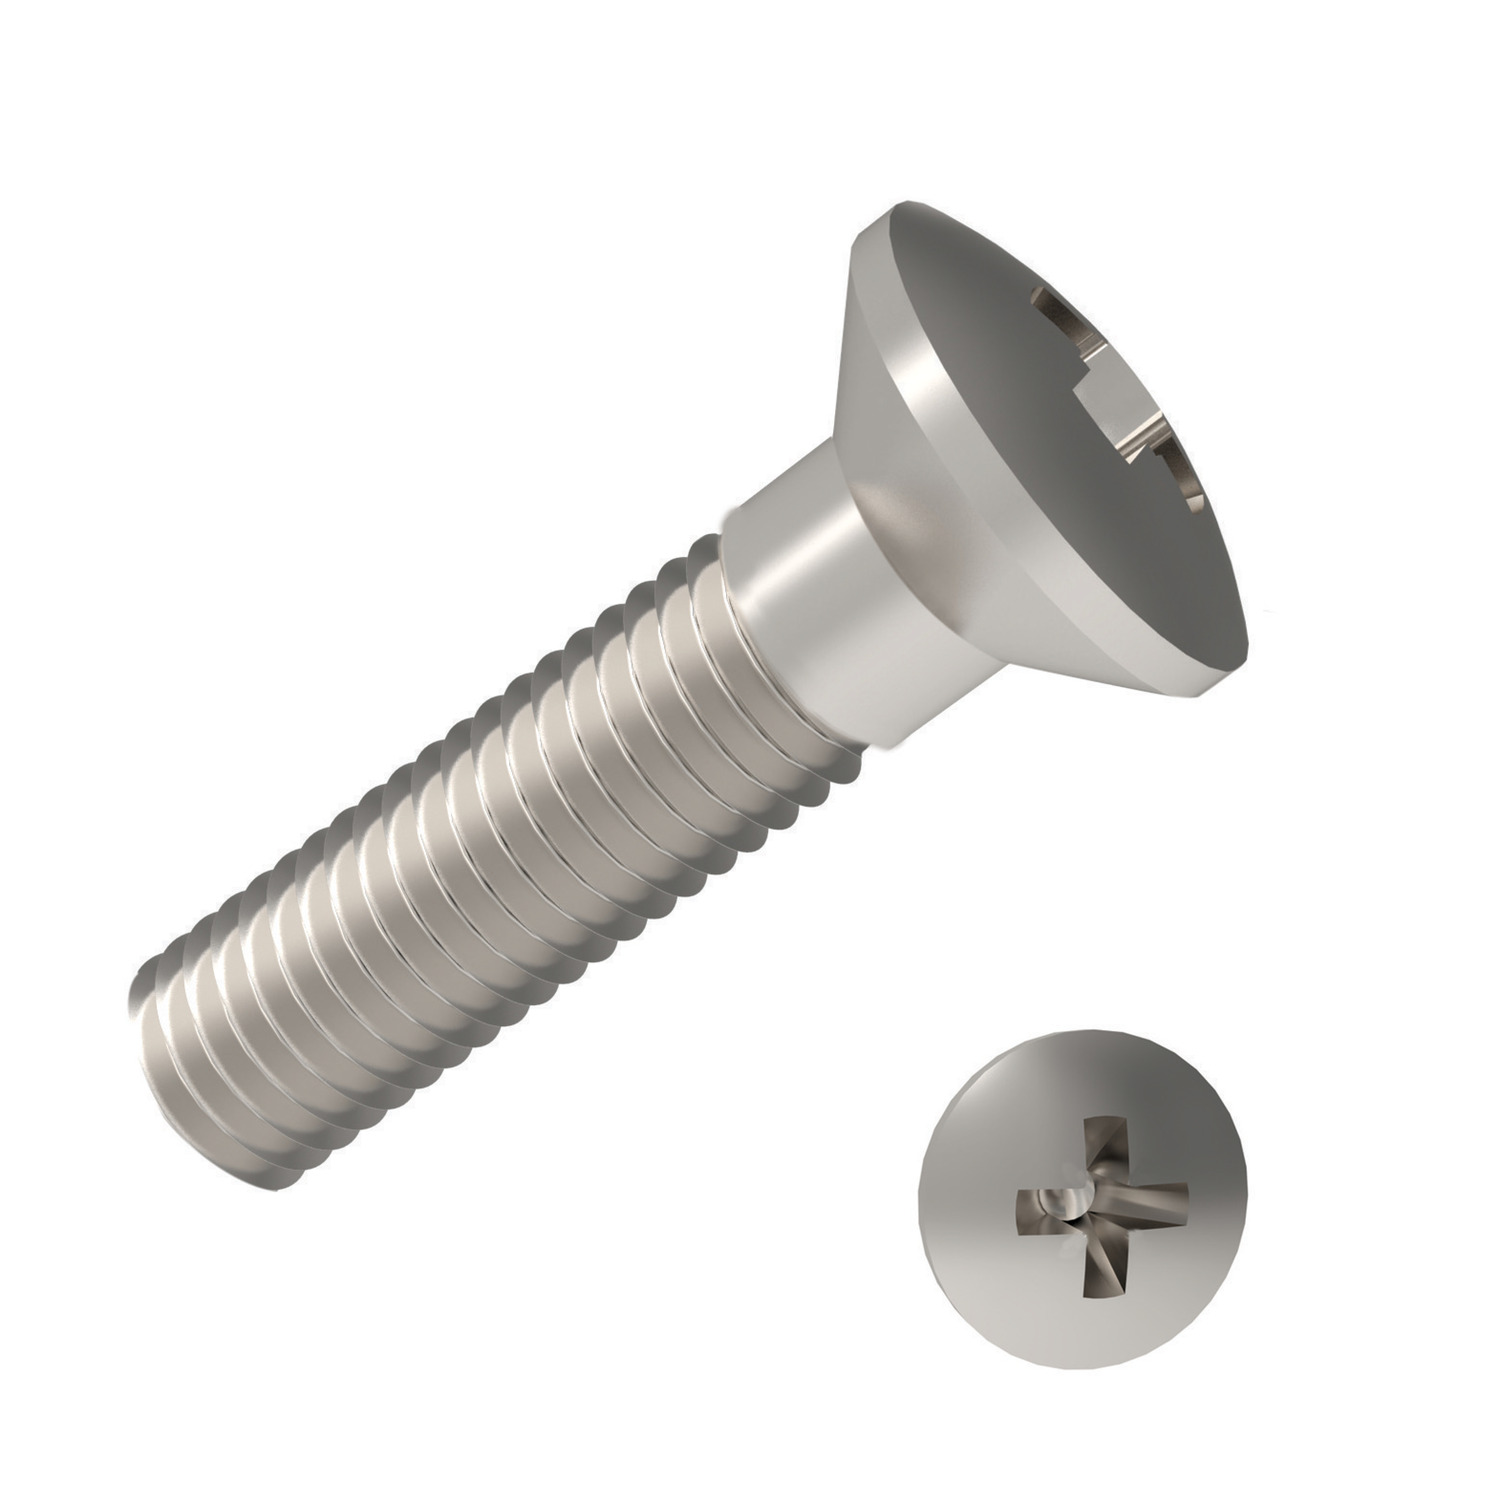 Product P0226.A2, Phillip Raised C'sunk Machine Screws Phillips raised - A2 stainless / 